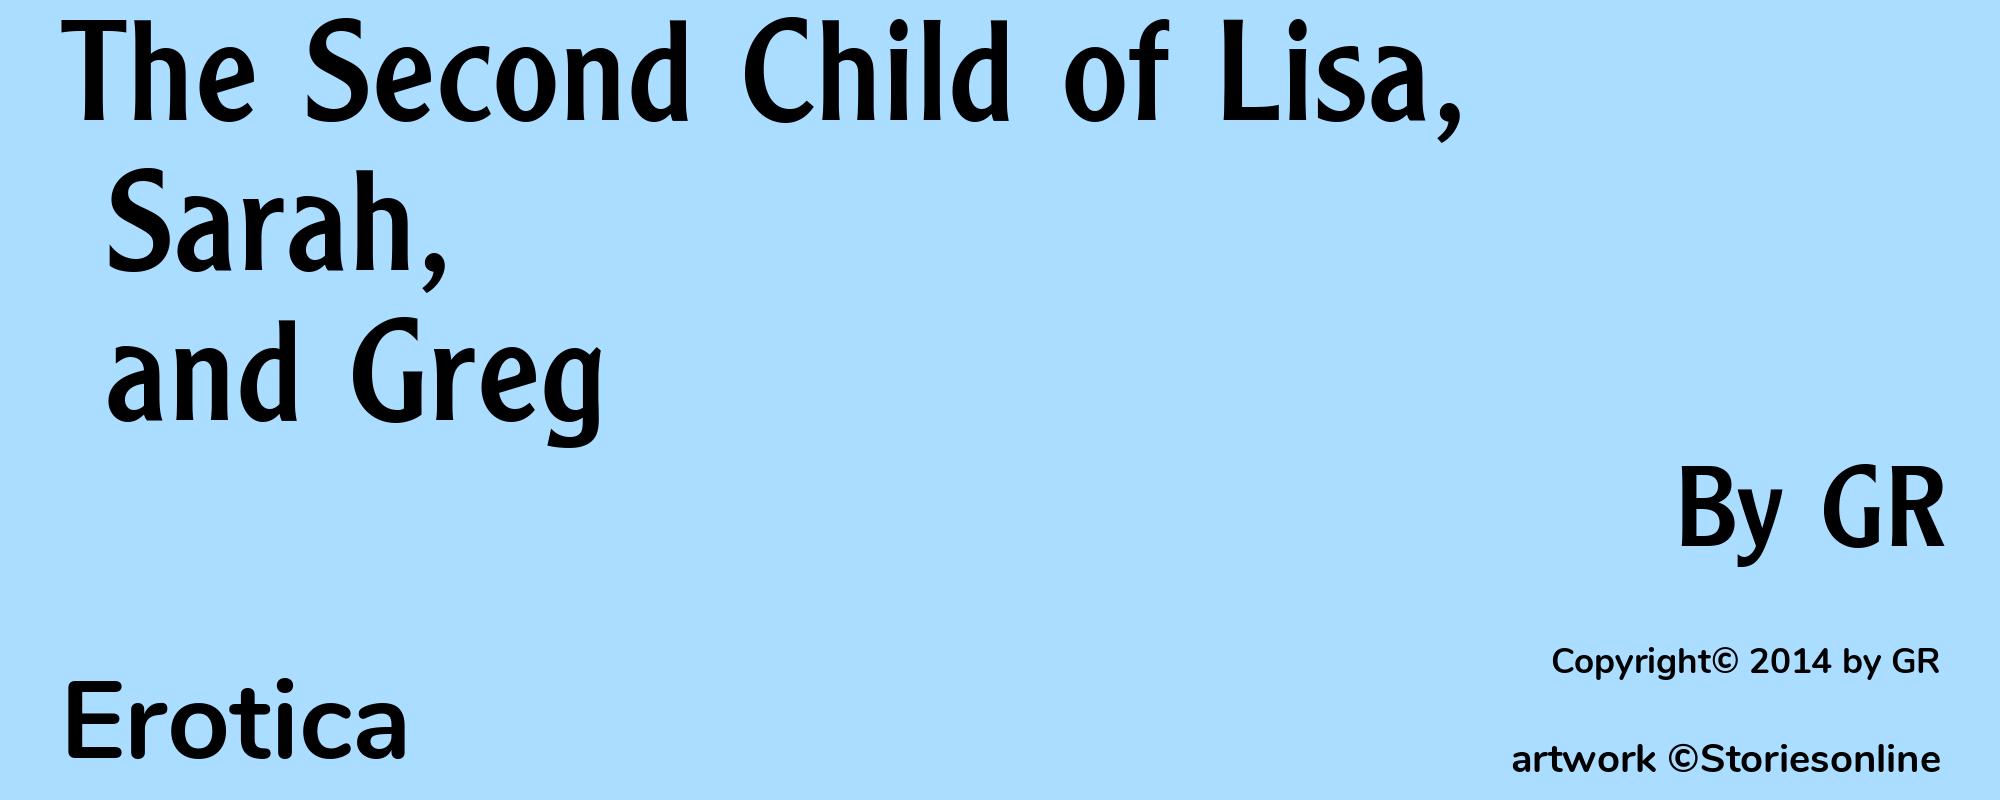 The Second Child of Lisa, Sarah, and Greg - Cover